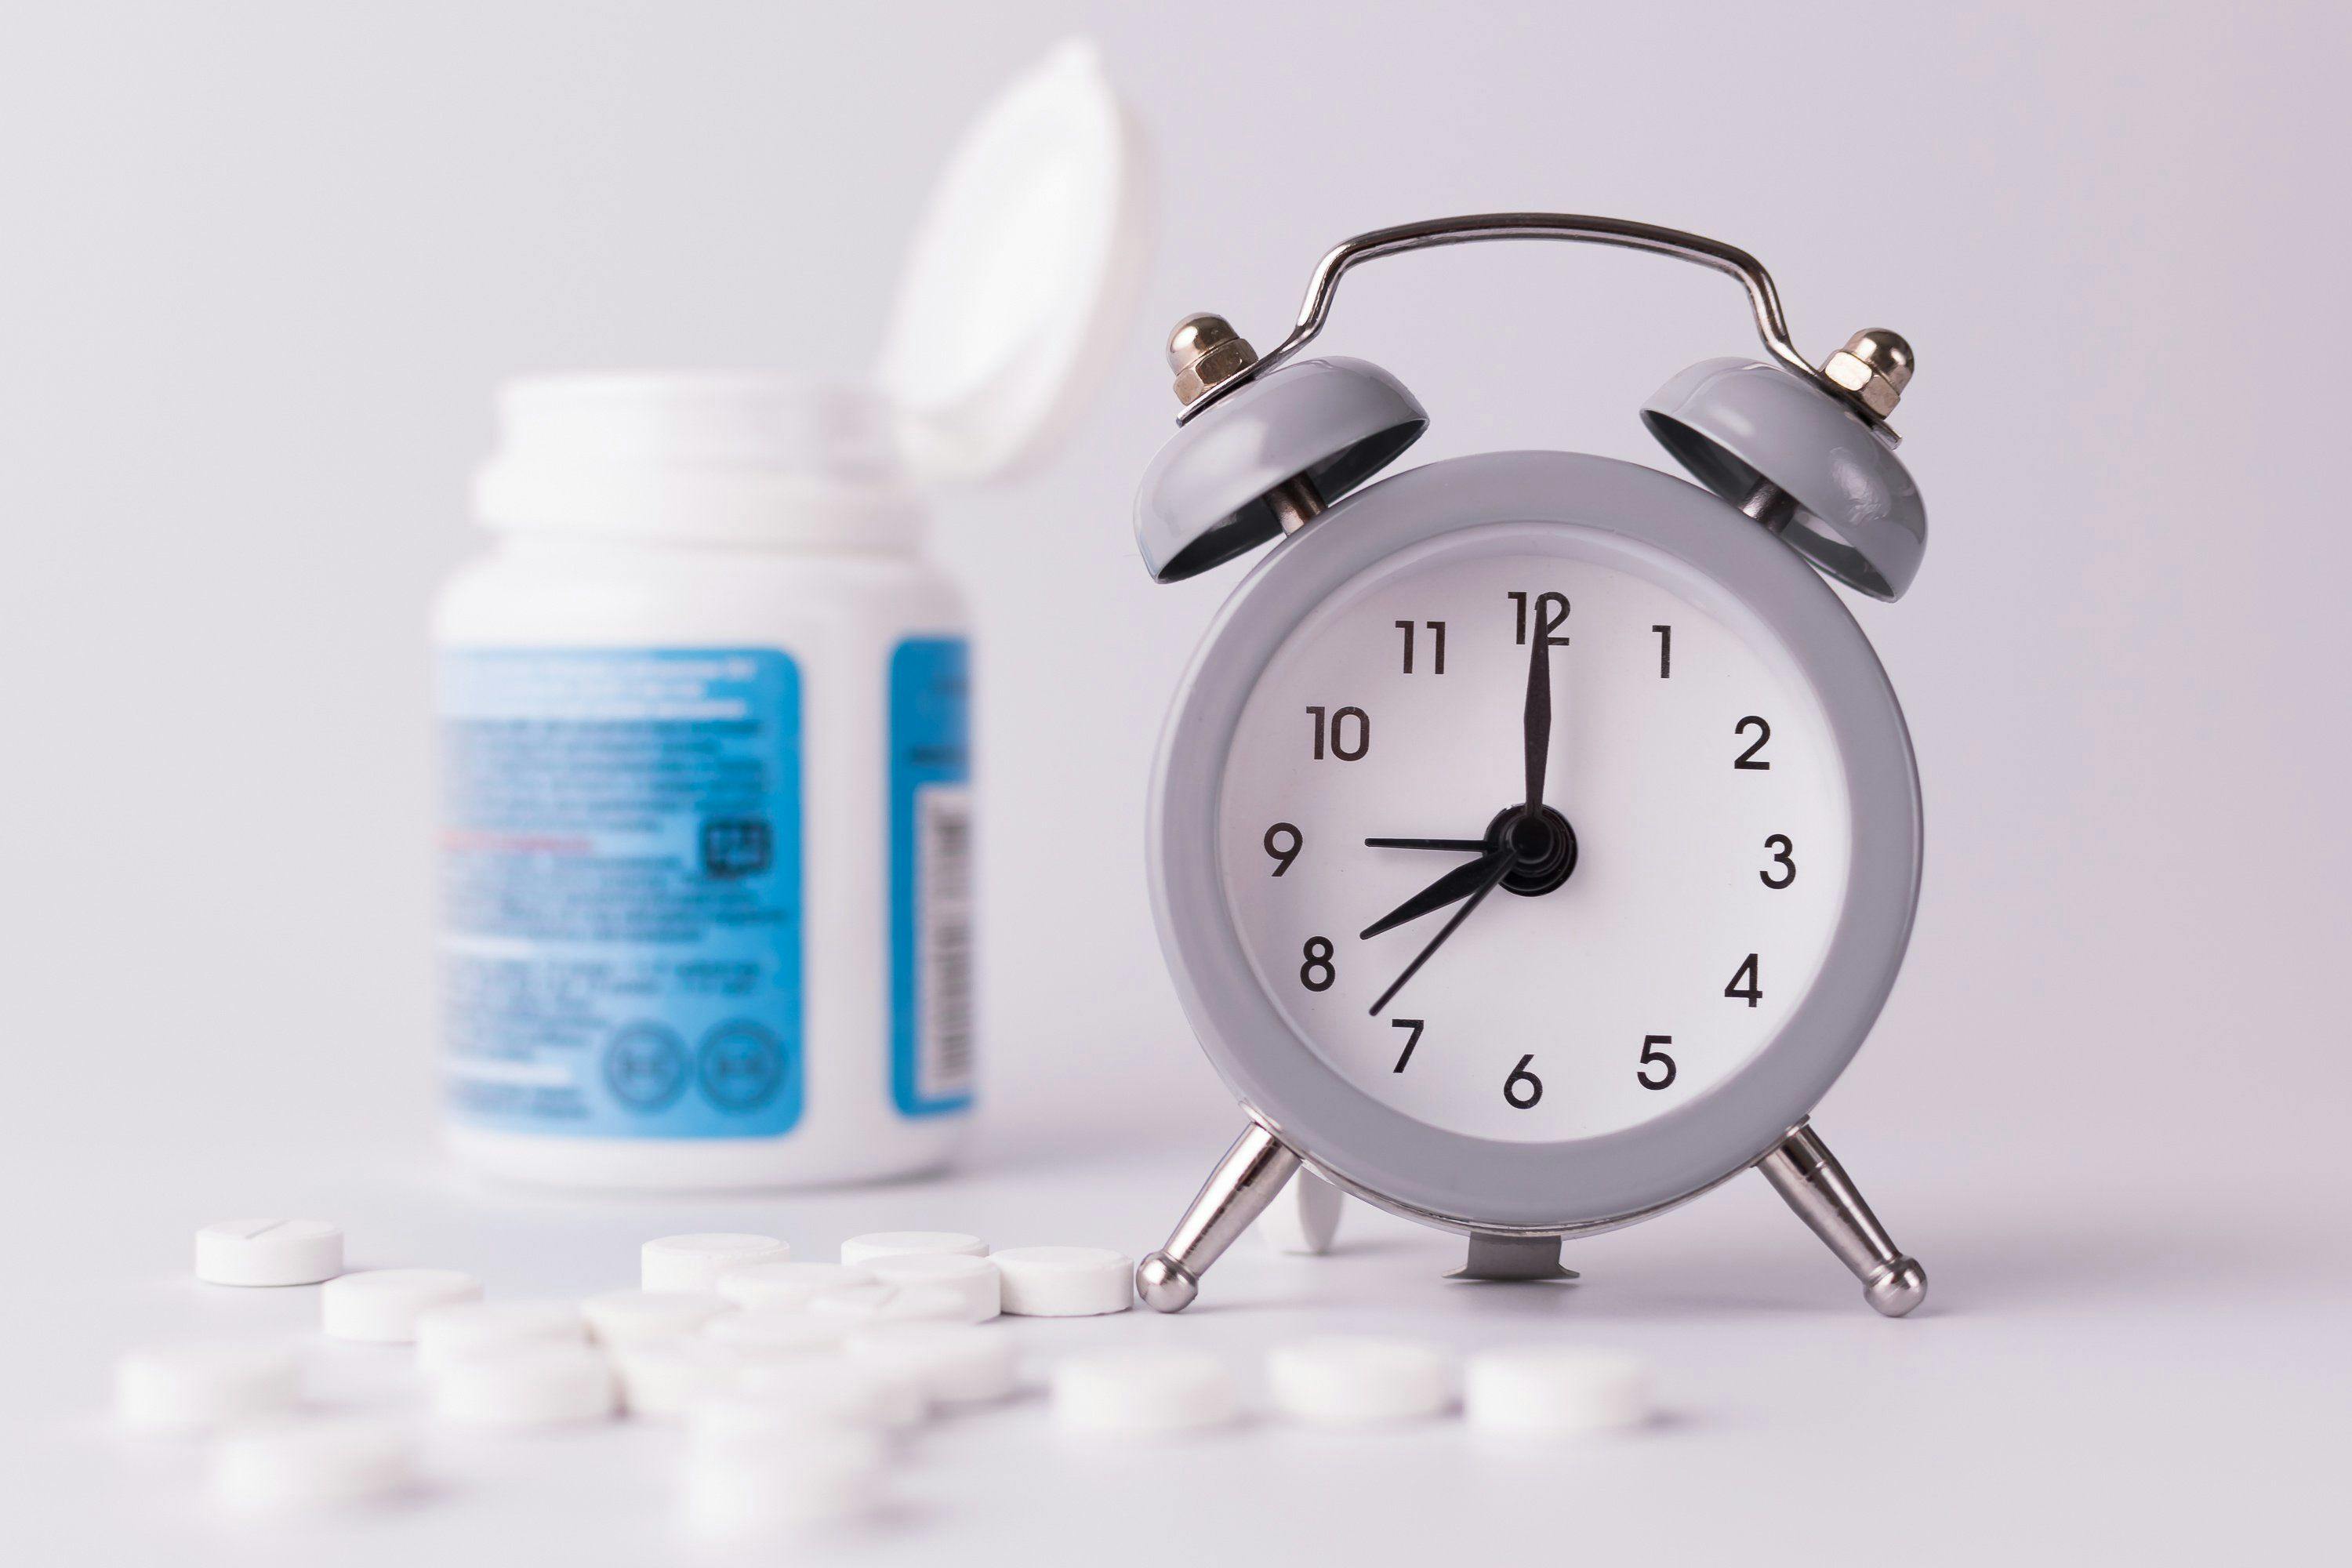  How appointment time may influence opioid prescribing  